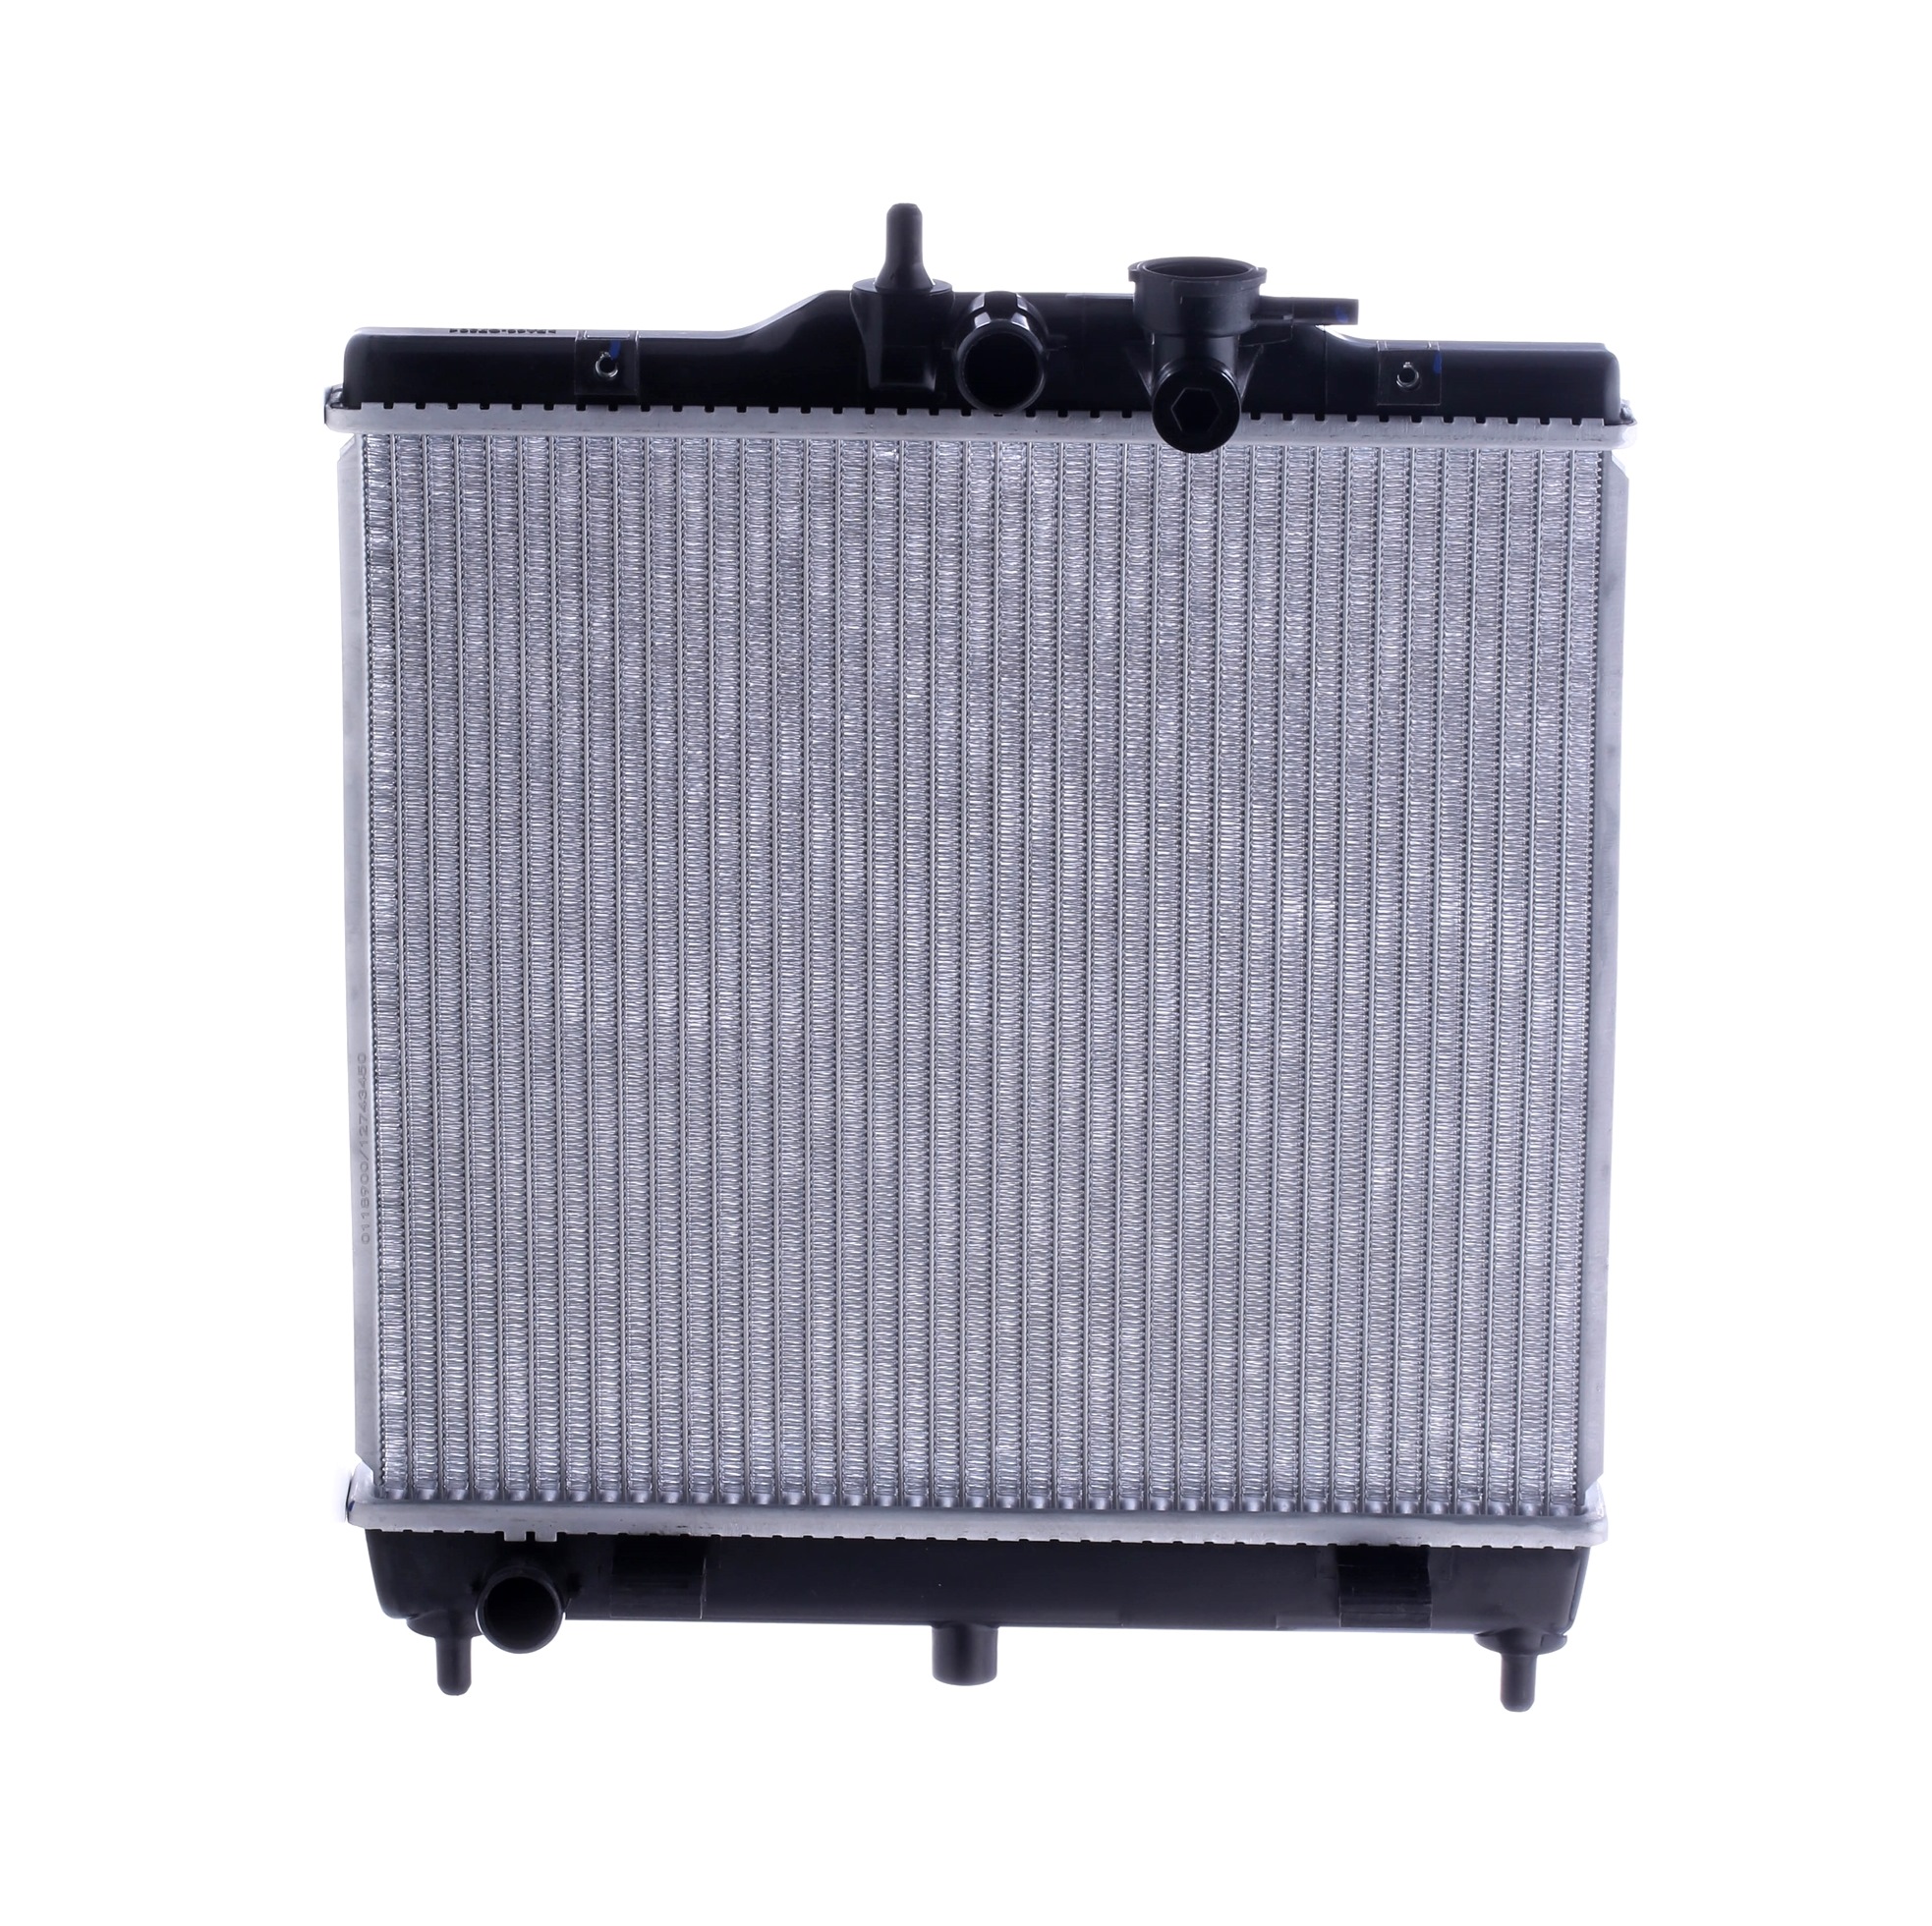 STARK SKRD-0120787 Engine radiator Aluminium, 398 x 355 x 17 mm, with mounting parts, Brazed cooling fins